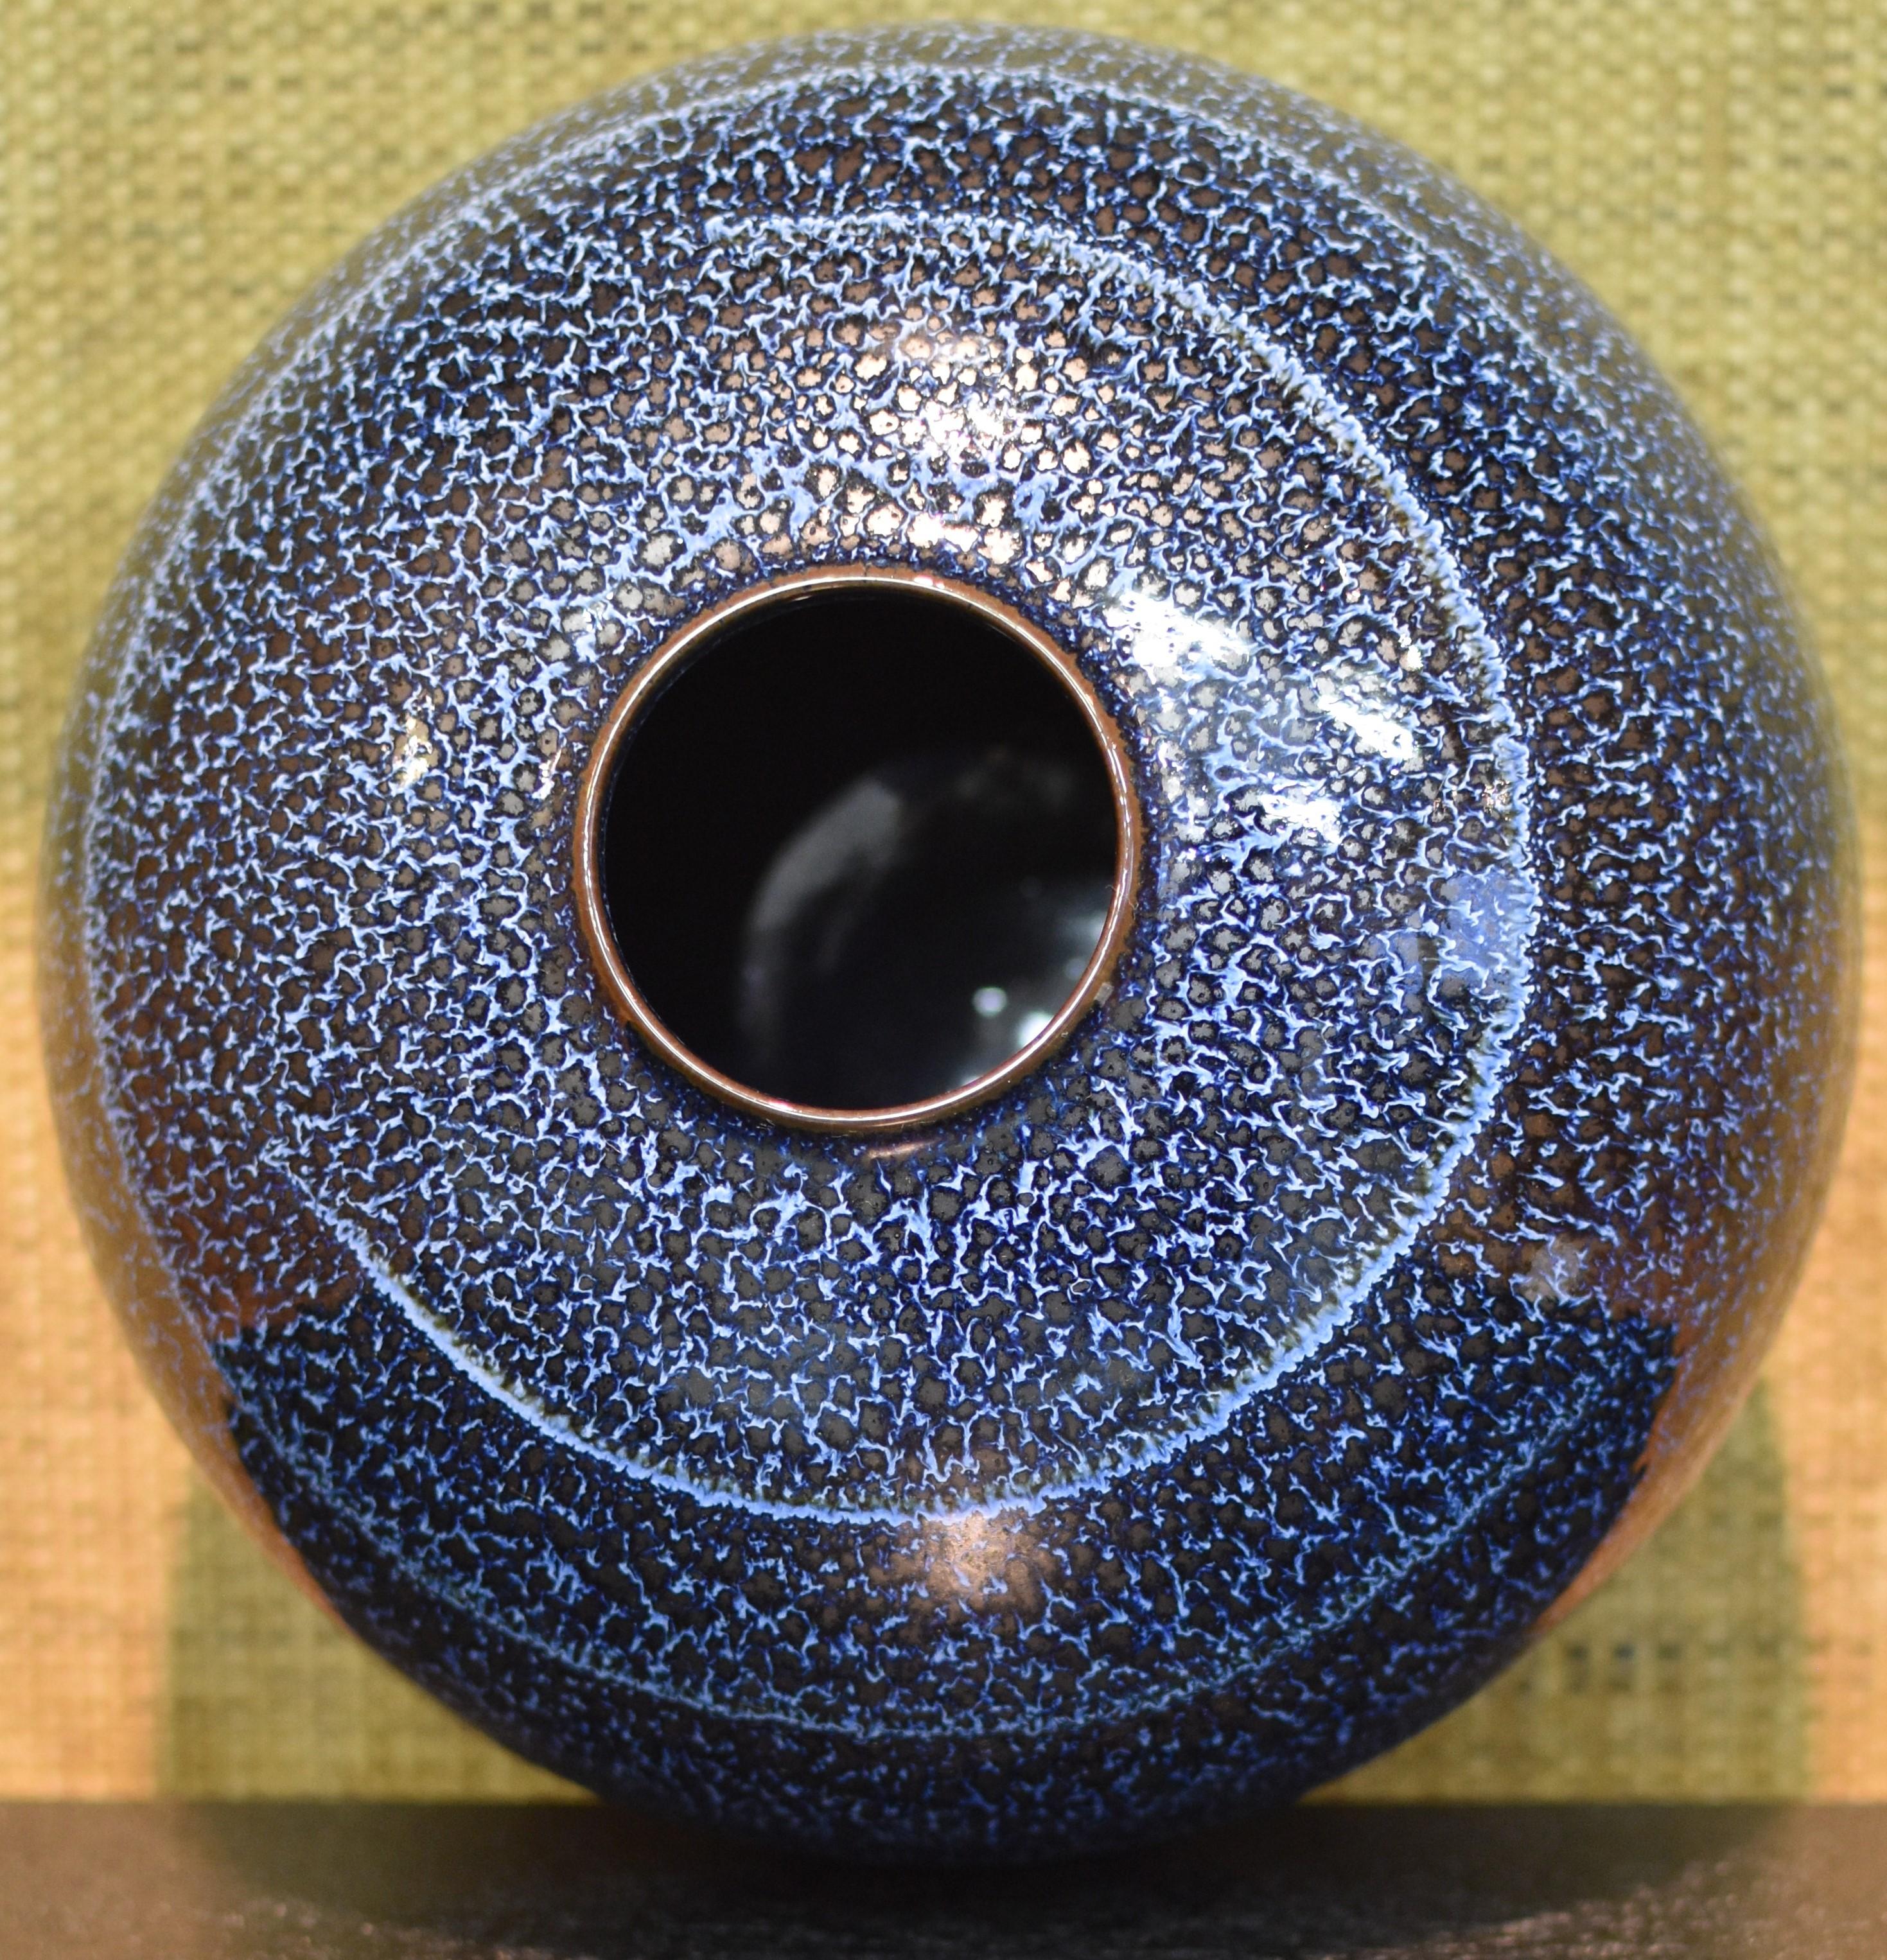 Hand-Crafted Japanese Hand-Glazed Blue Porcelain Vase by Contemporary Master Artist